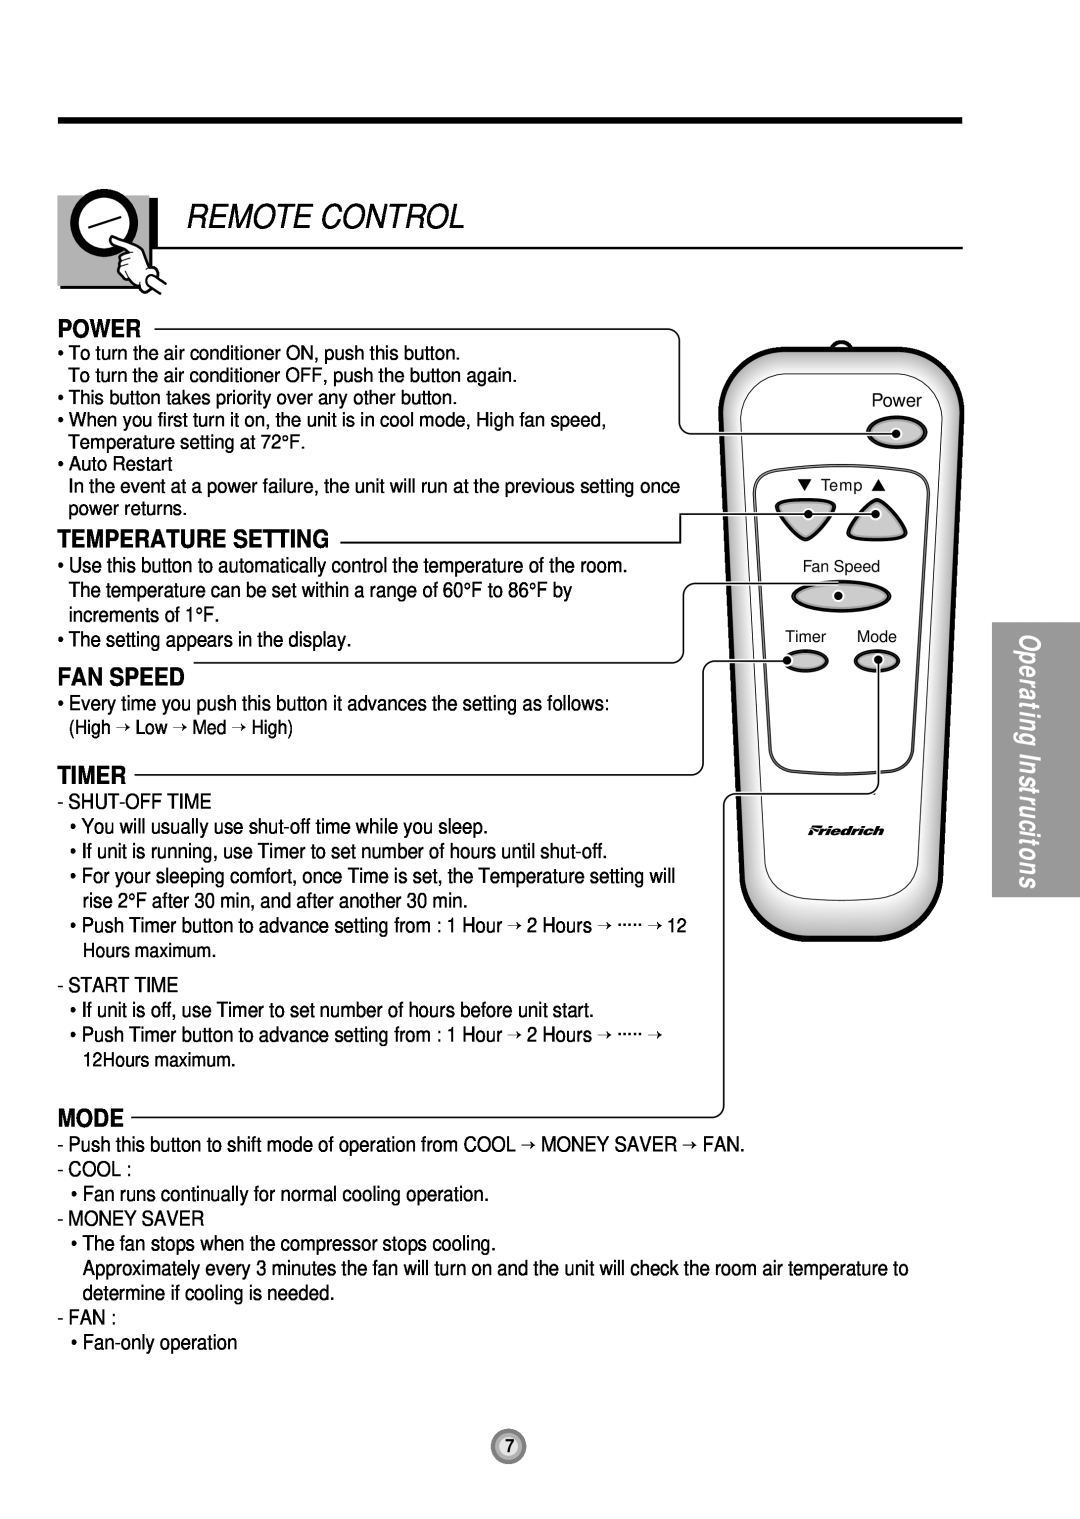 Friedrich US10, US12 manual Remote Control, Power, Temperature Setting, Fan Speed, Timer, Mode, Operating Instrucitons 